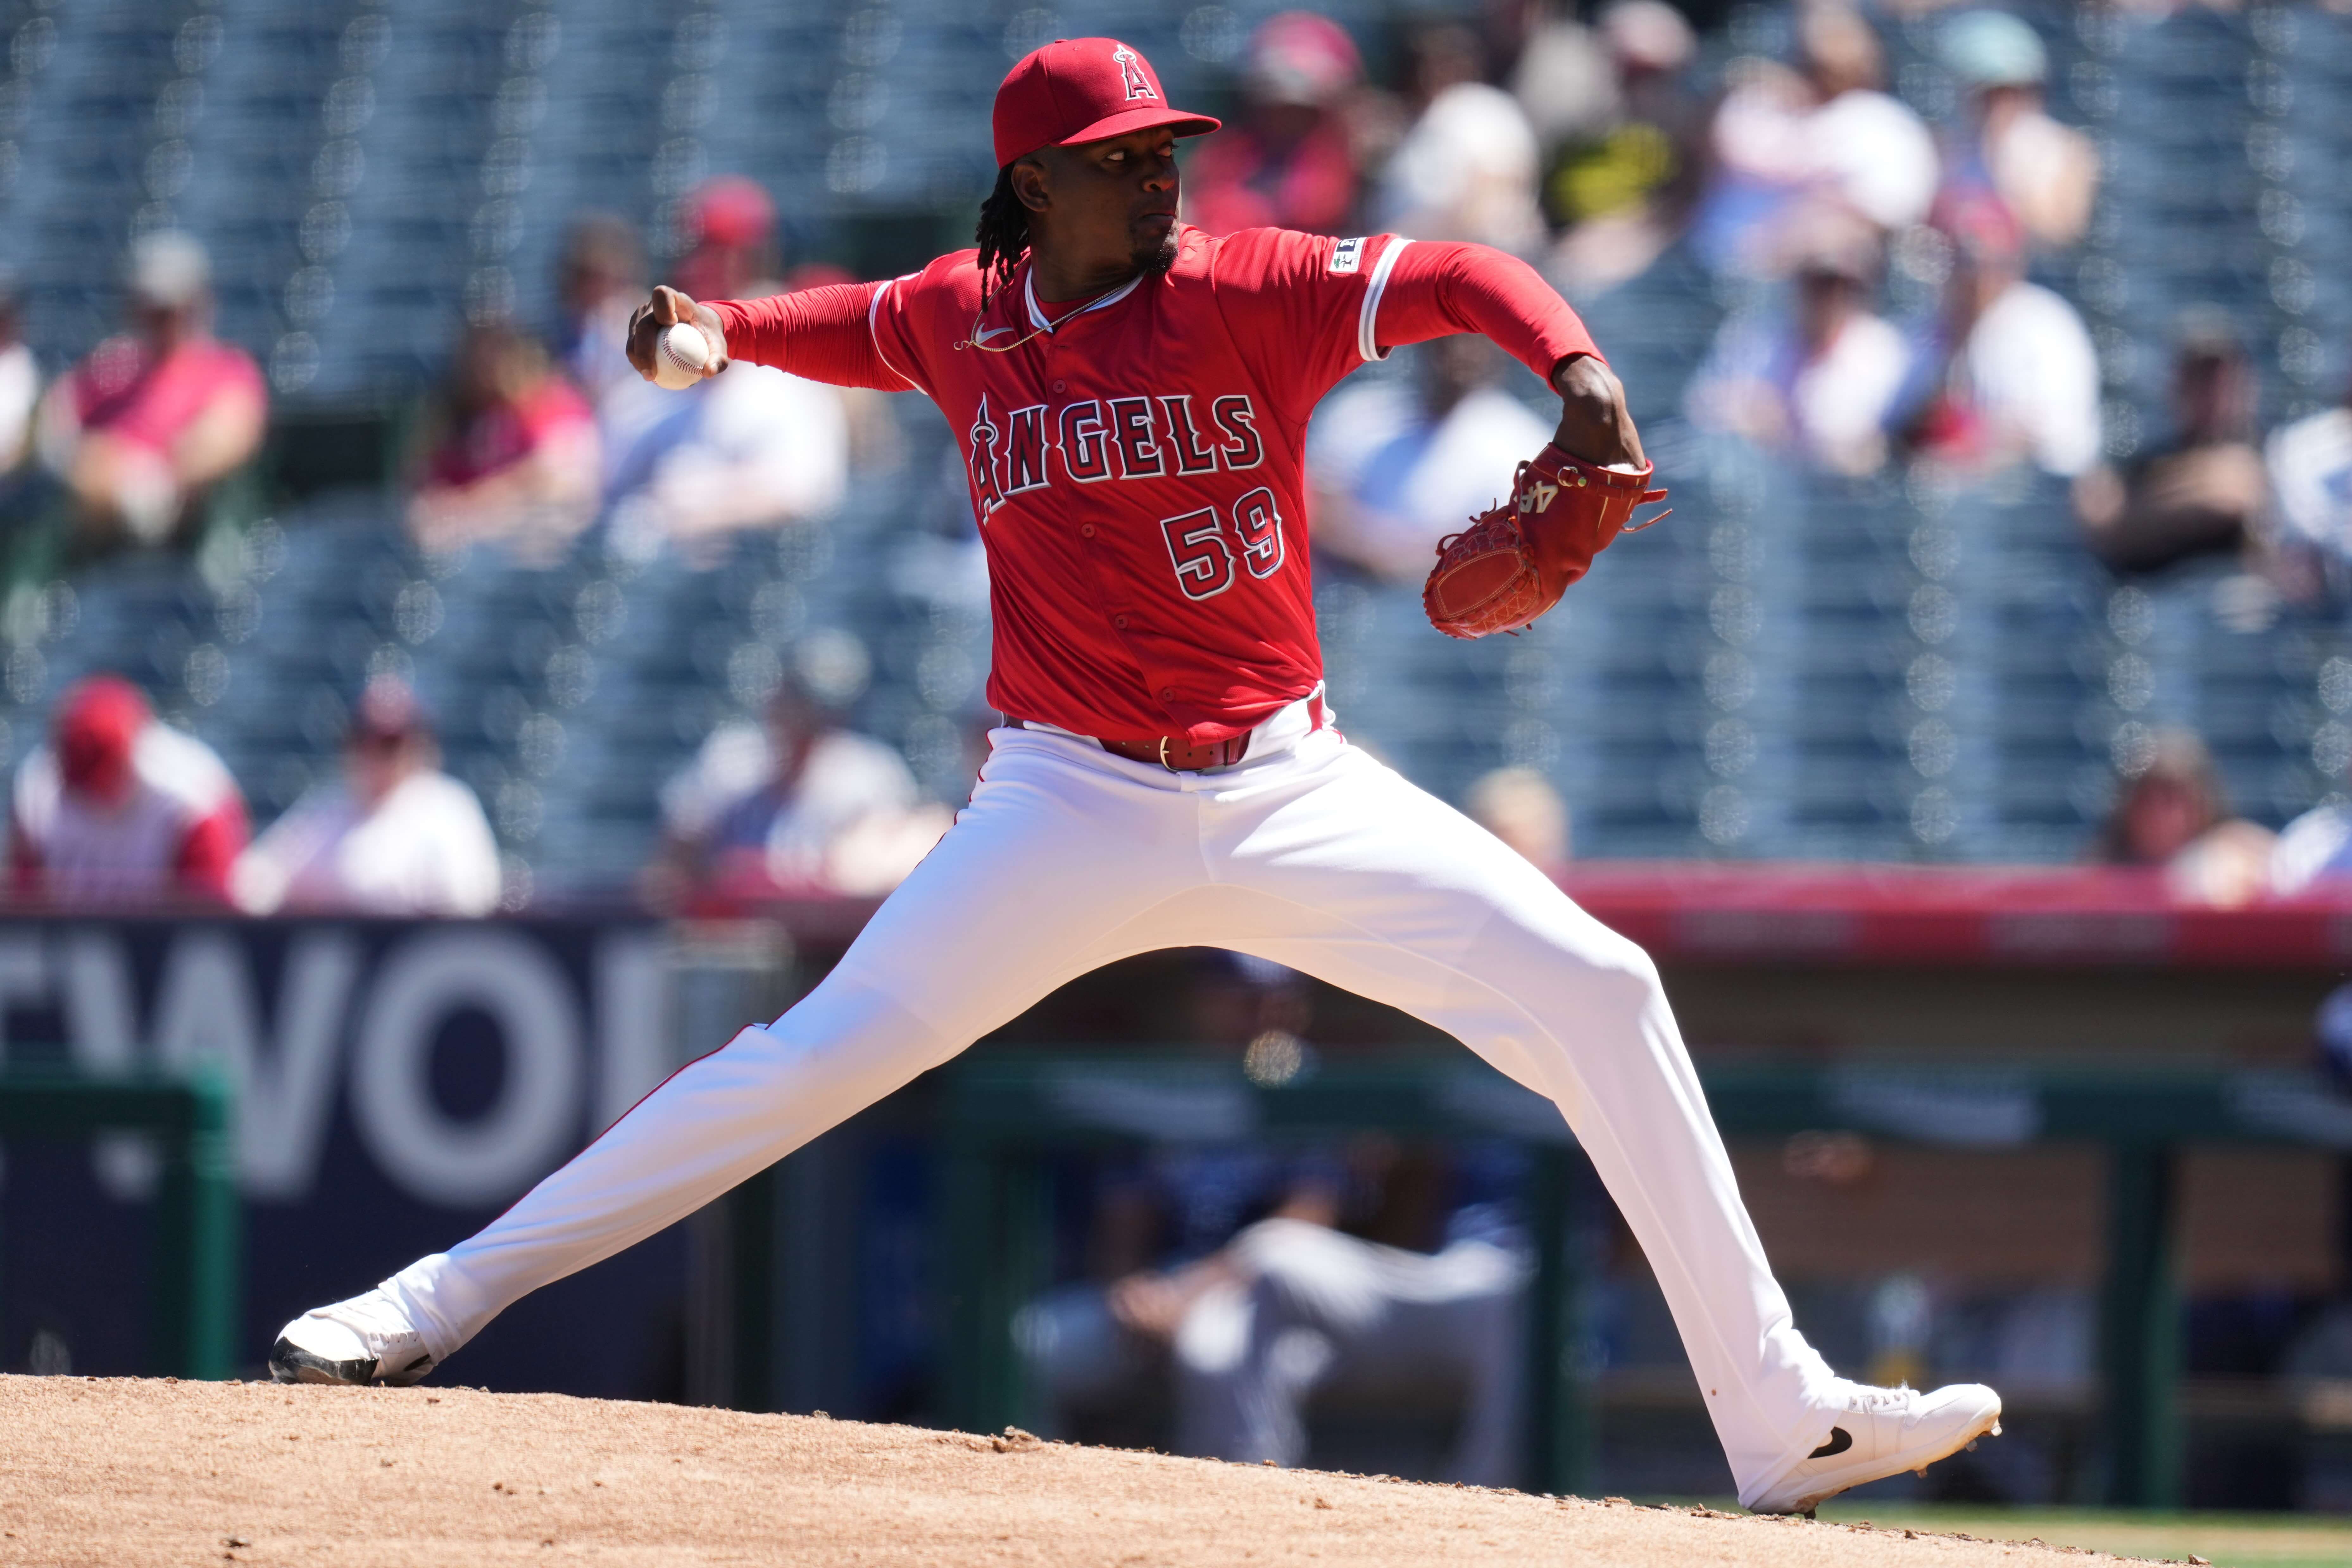 Angels vs Mariners Prediction, Picks, and Odds for Tonight’s MLB Game